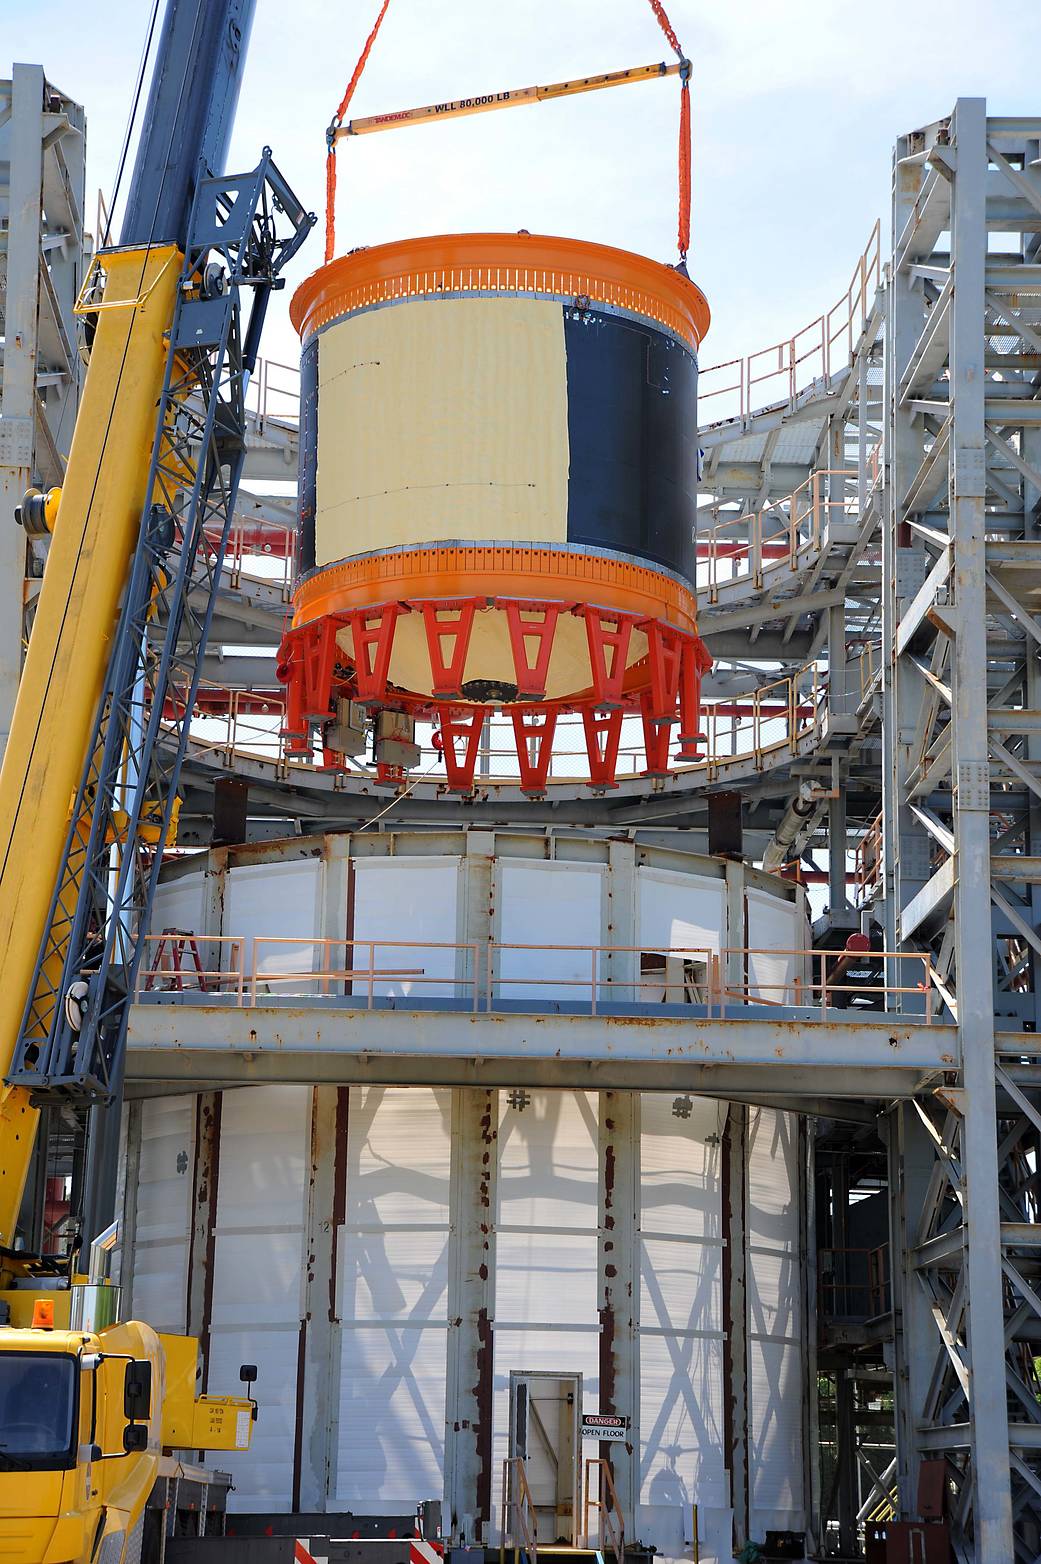 NASA's composite cryotank is lowered into a structural test stand where it was tested with cryogenic hydrogen and structural loa